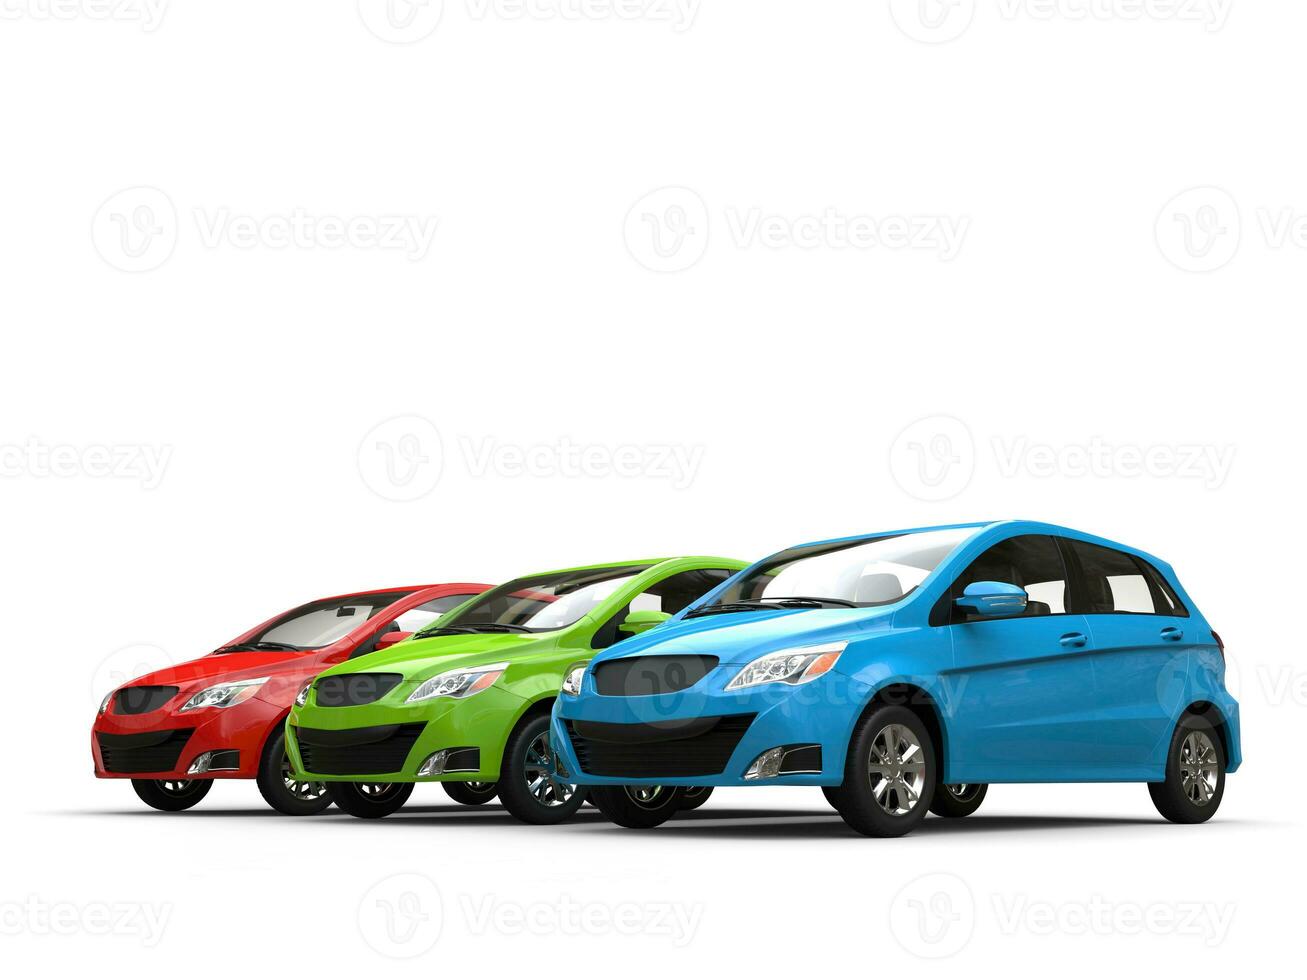 Modern small compact economic cars in red, green and blue photo